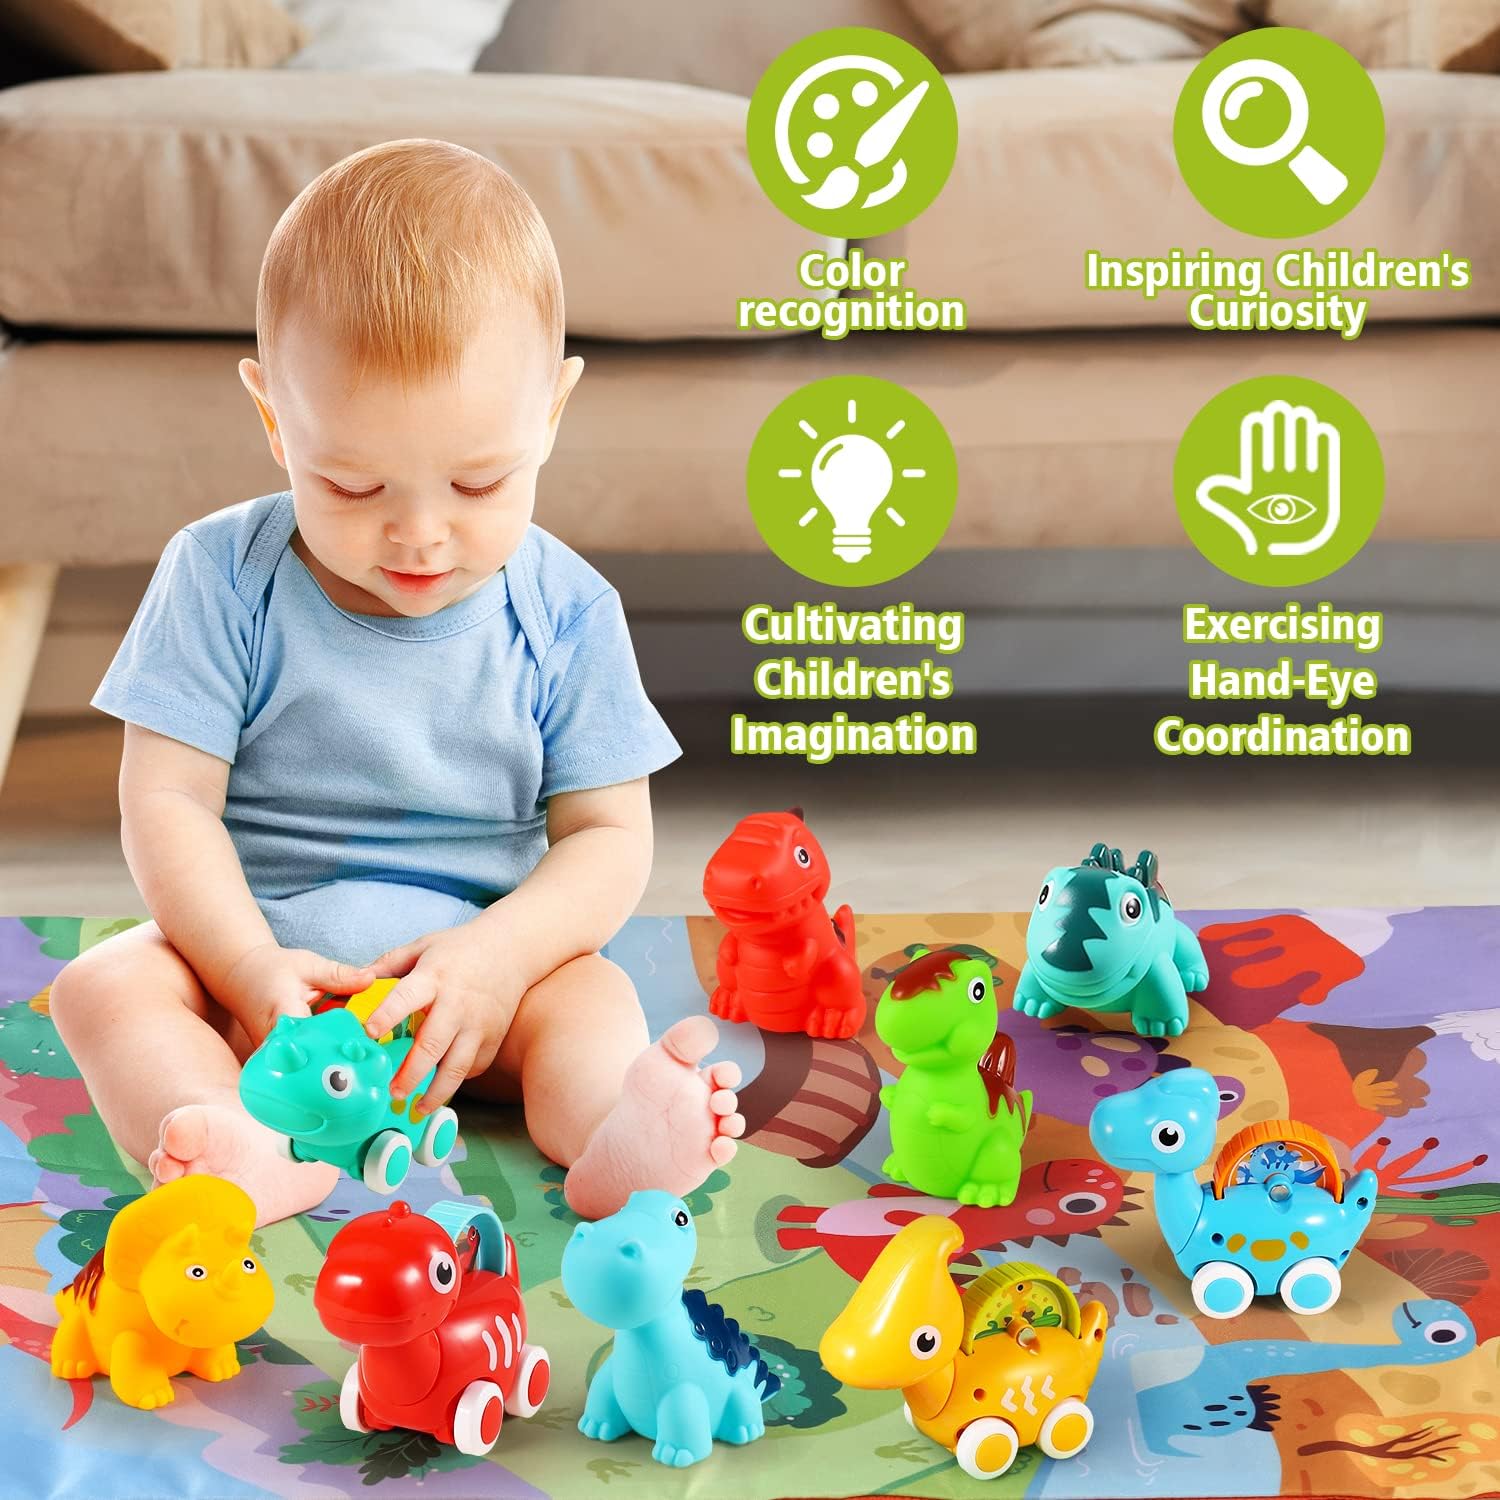 ALASOU 9 PCS Dinosaur Car Toys with Playmat/Storage Bag|1st Birthday Gifts for Toddler Toys Age 1-2|Baby Toys for 1 2 3 Year Old Boy|1 2 Year Old Boy Birthday Gift for Infant Toddlers